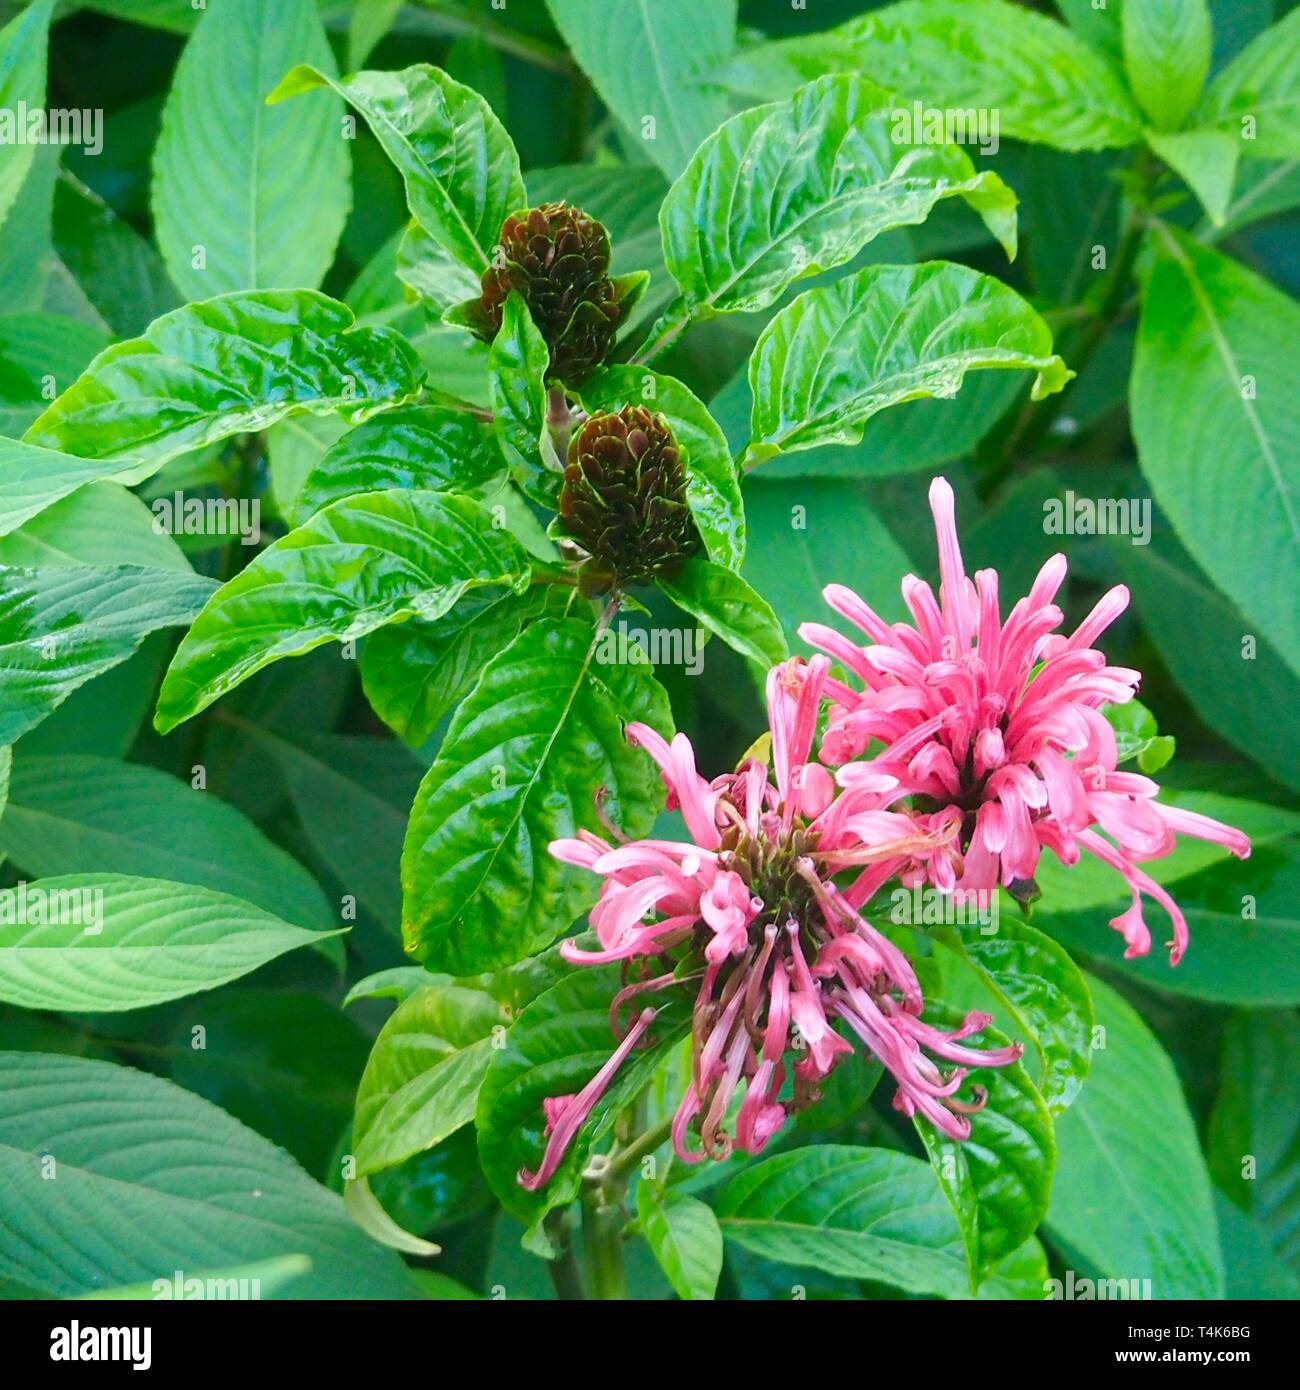 Jacobinia plant or Justicia carnea with its beautiful pink flowers and lush green leaves Stock Photo